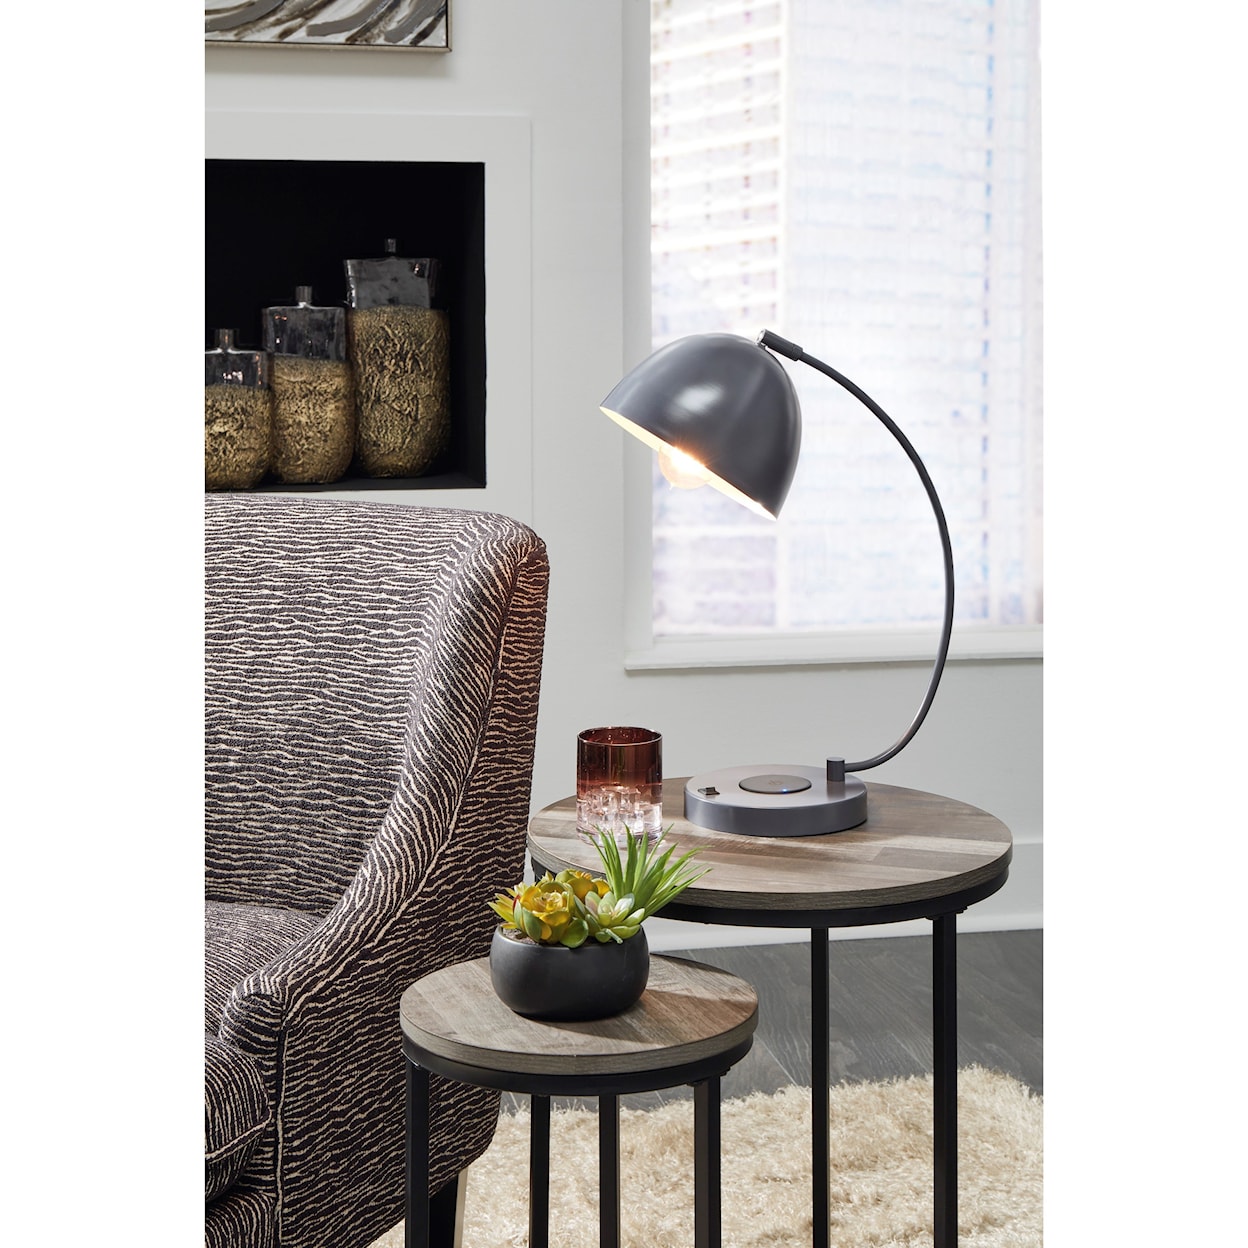 Signature Design by Ashley Lamps - Contemporary Austbeck Gray Metal Desk Lamp